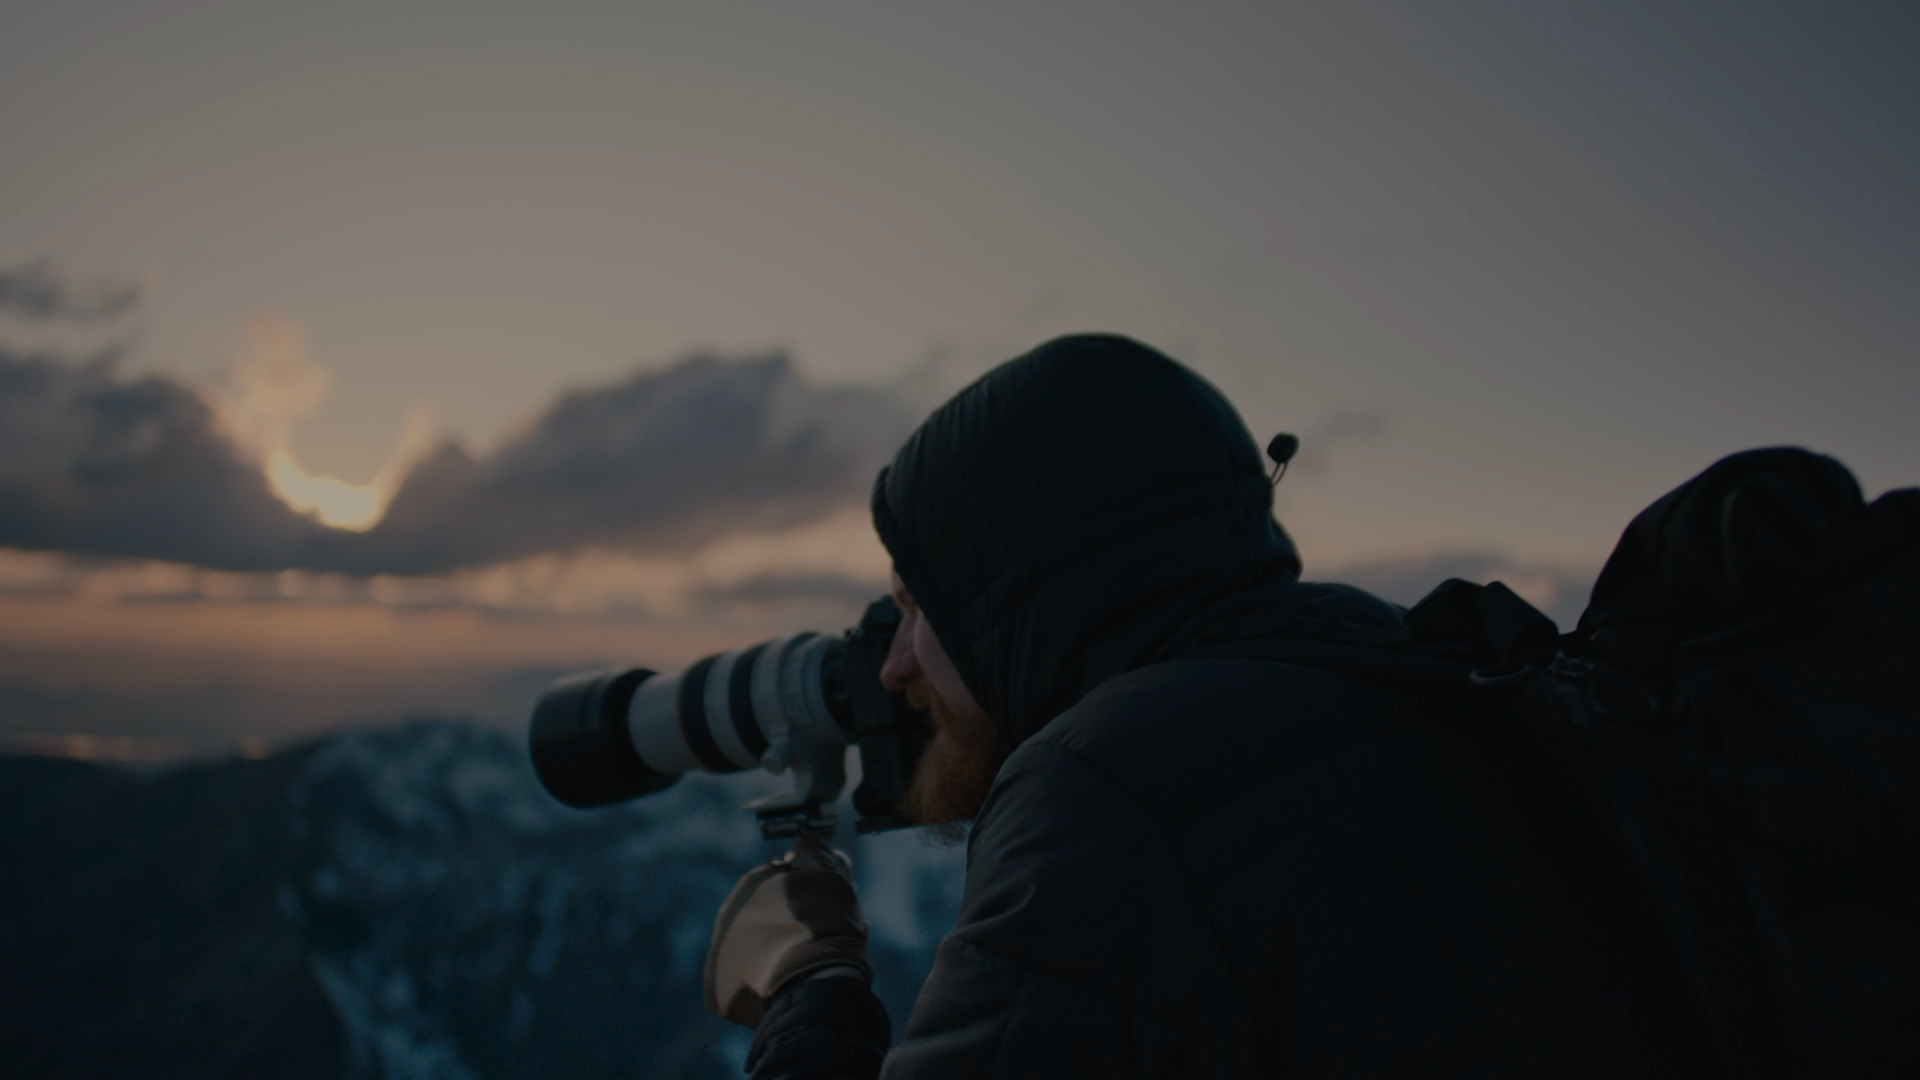 Photographer at dusk in the mountains